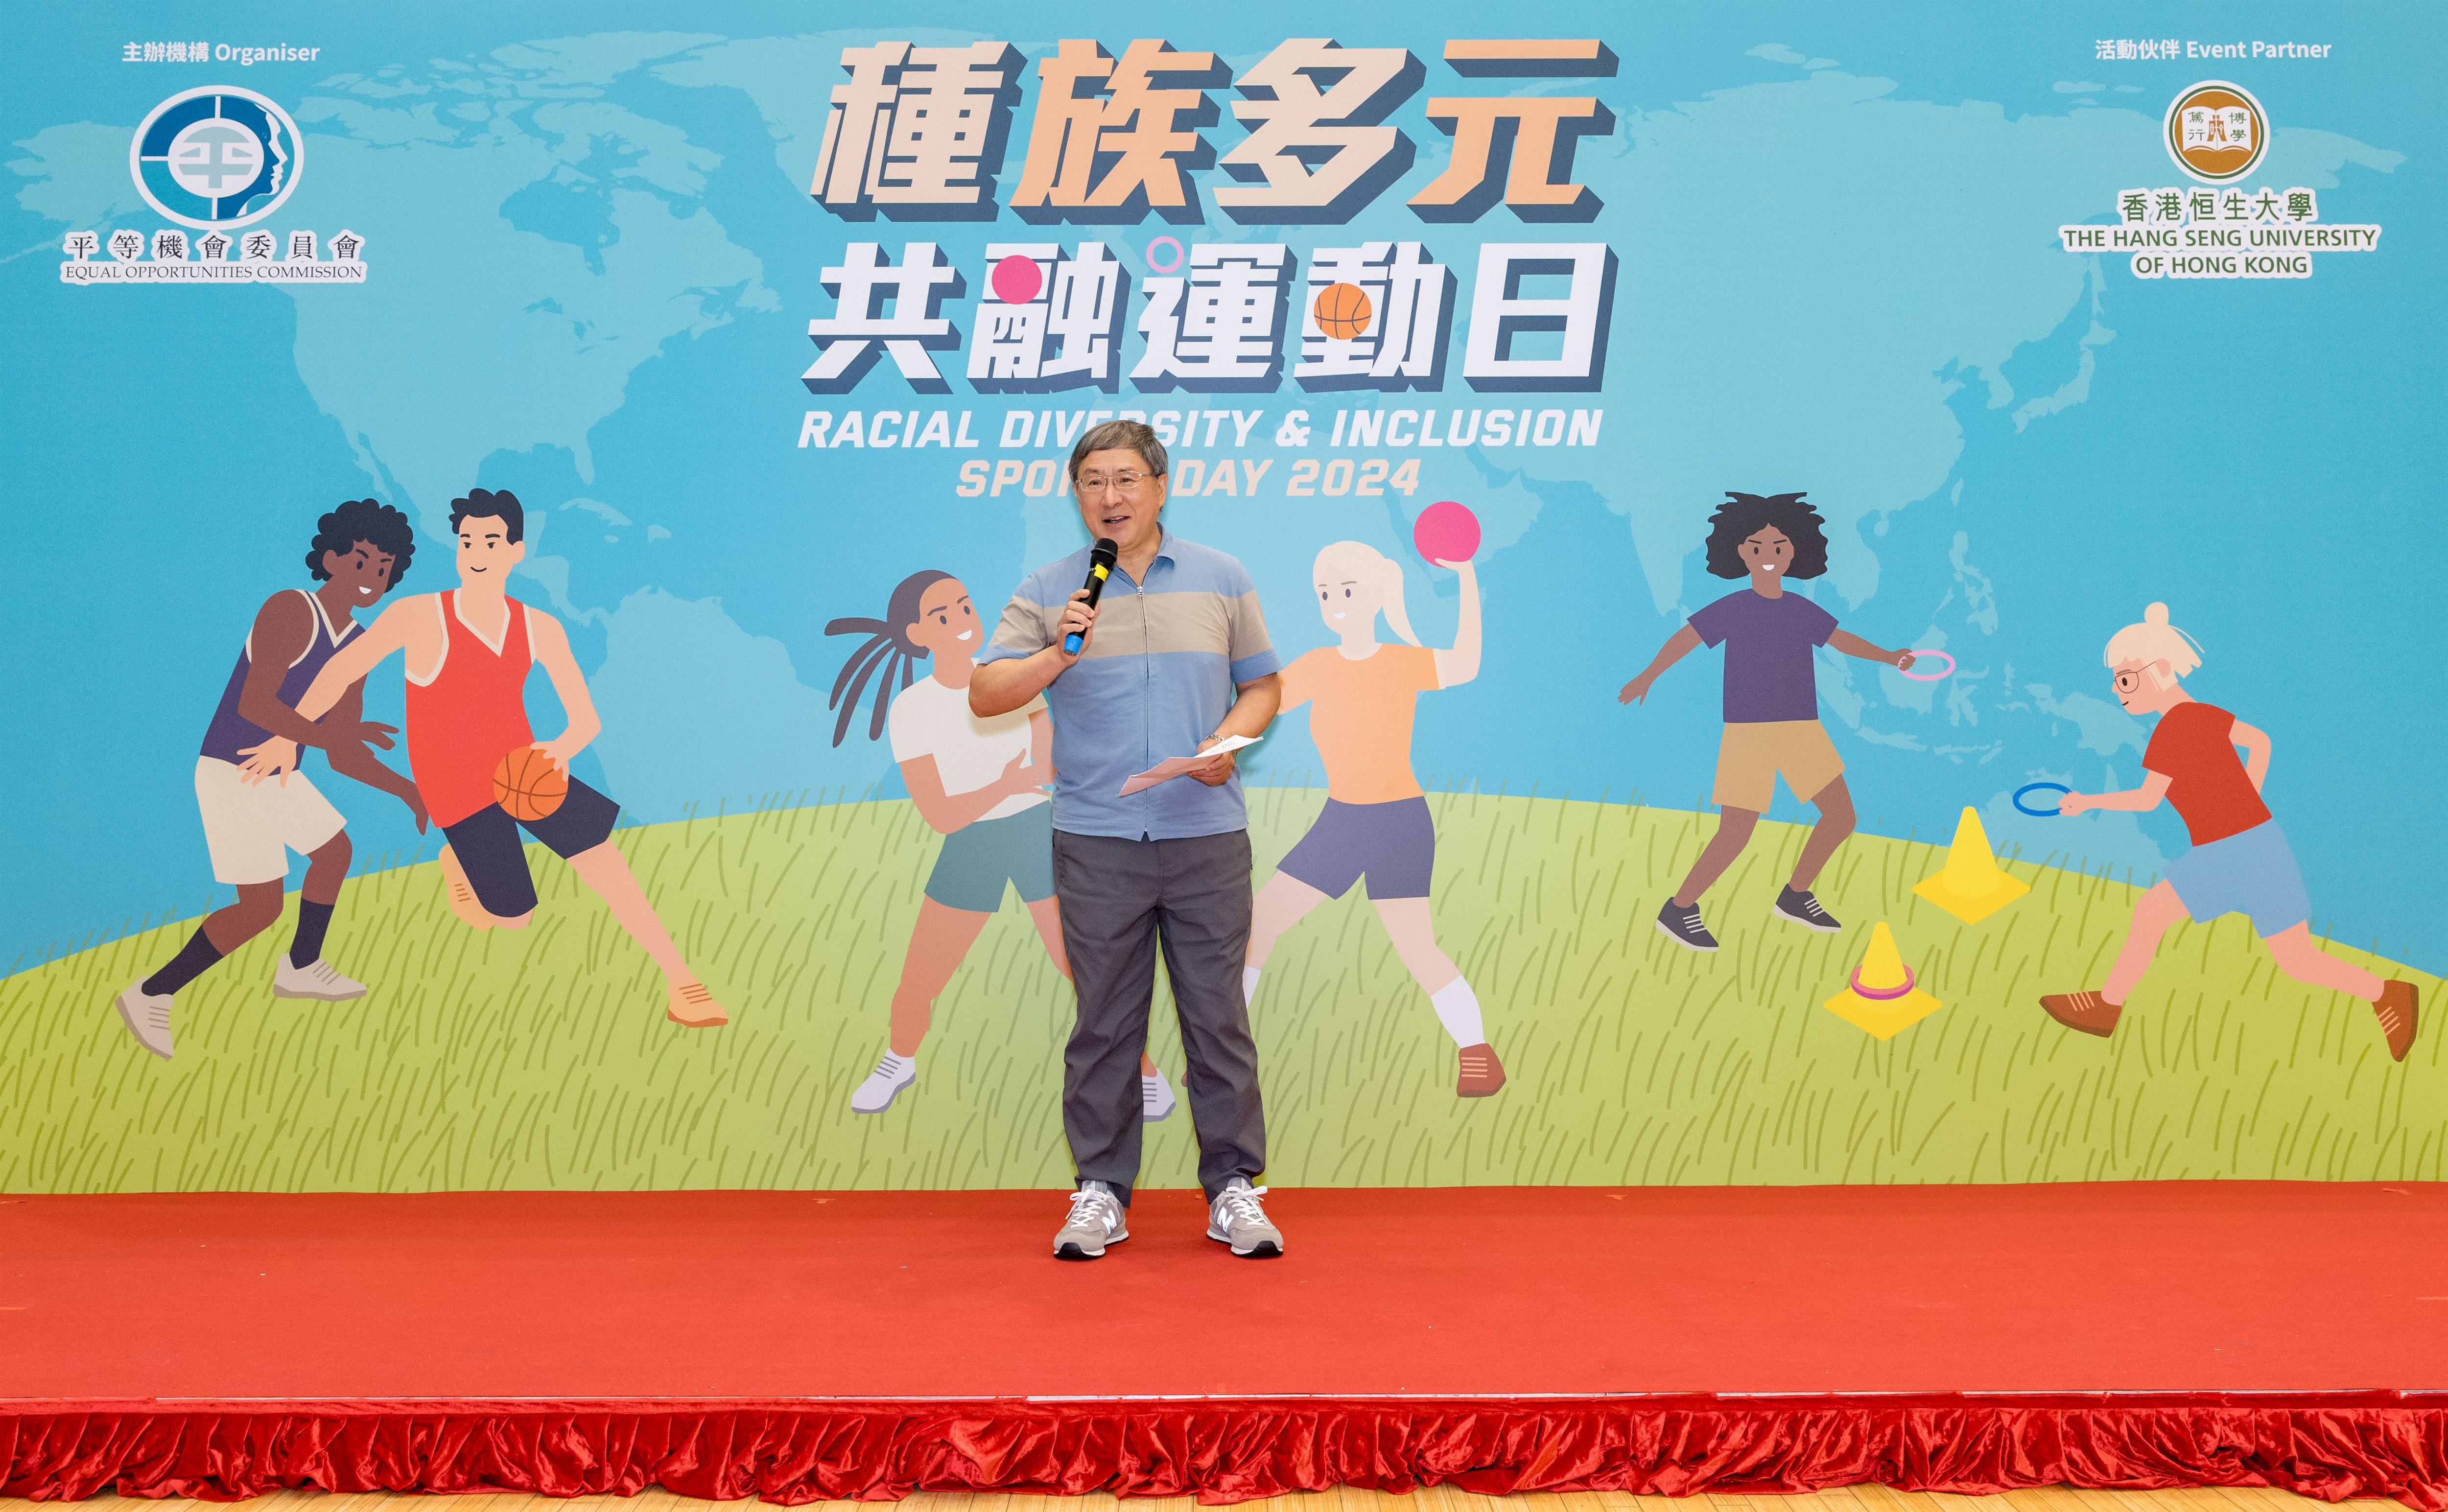 Mr Cheuk Wing-hing, GBS, JP, Deputy Chief Secretary for Administration of the HKSAR Government is delighted to see members of different sector taking part in the Racial Diversity and Inclusion Sports Day, joining hands in building a more diverse and inclusive society through practical actions.